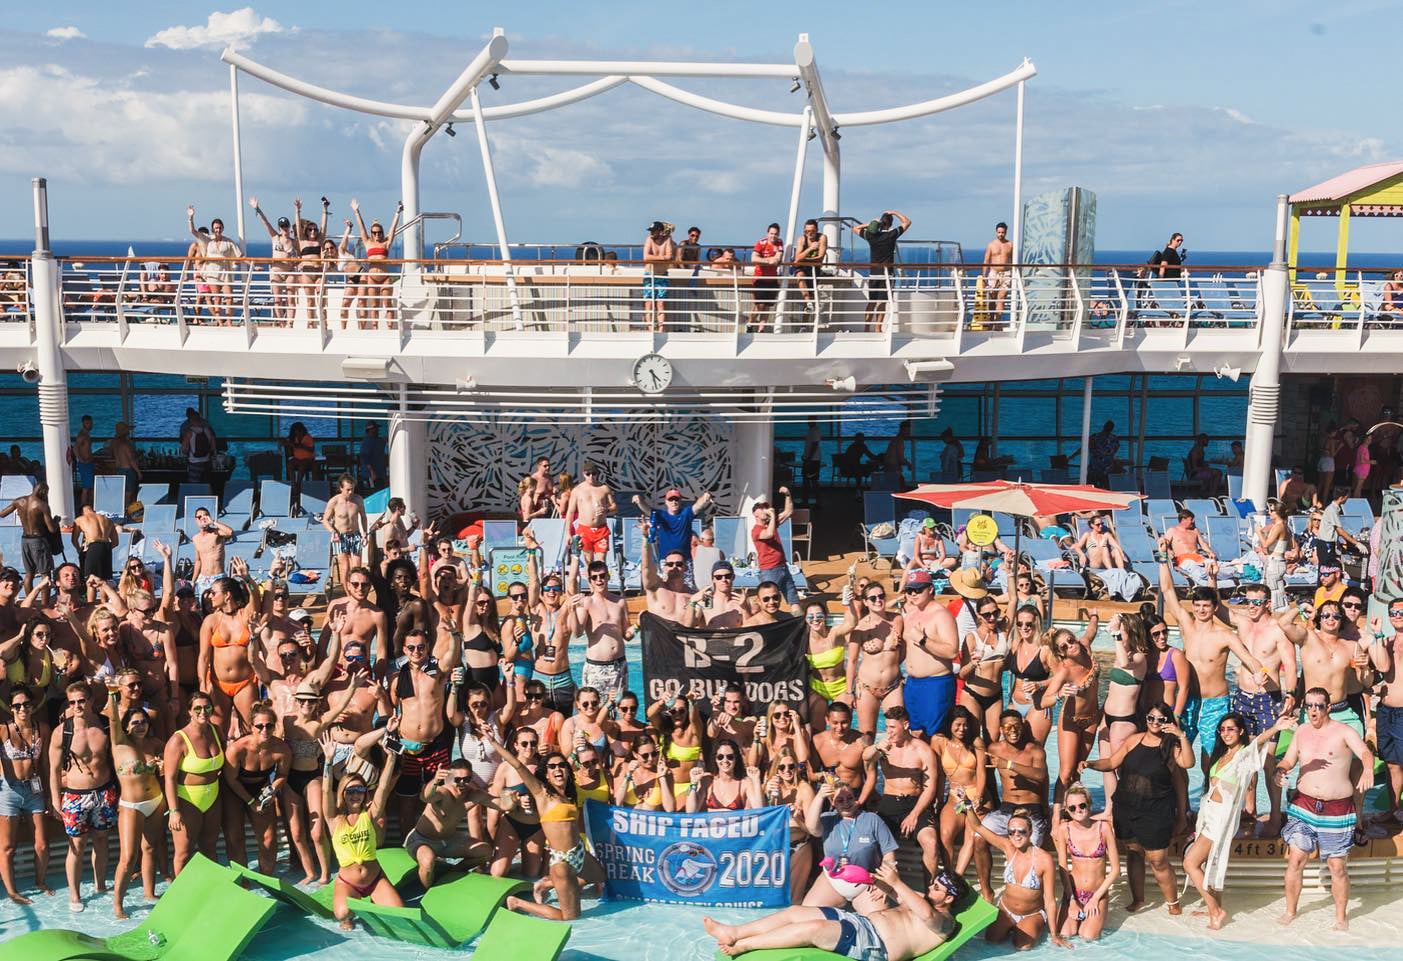 college party cruise week 3